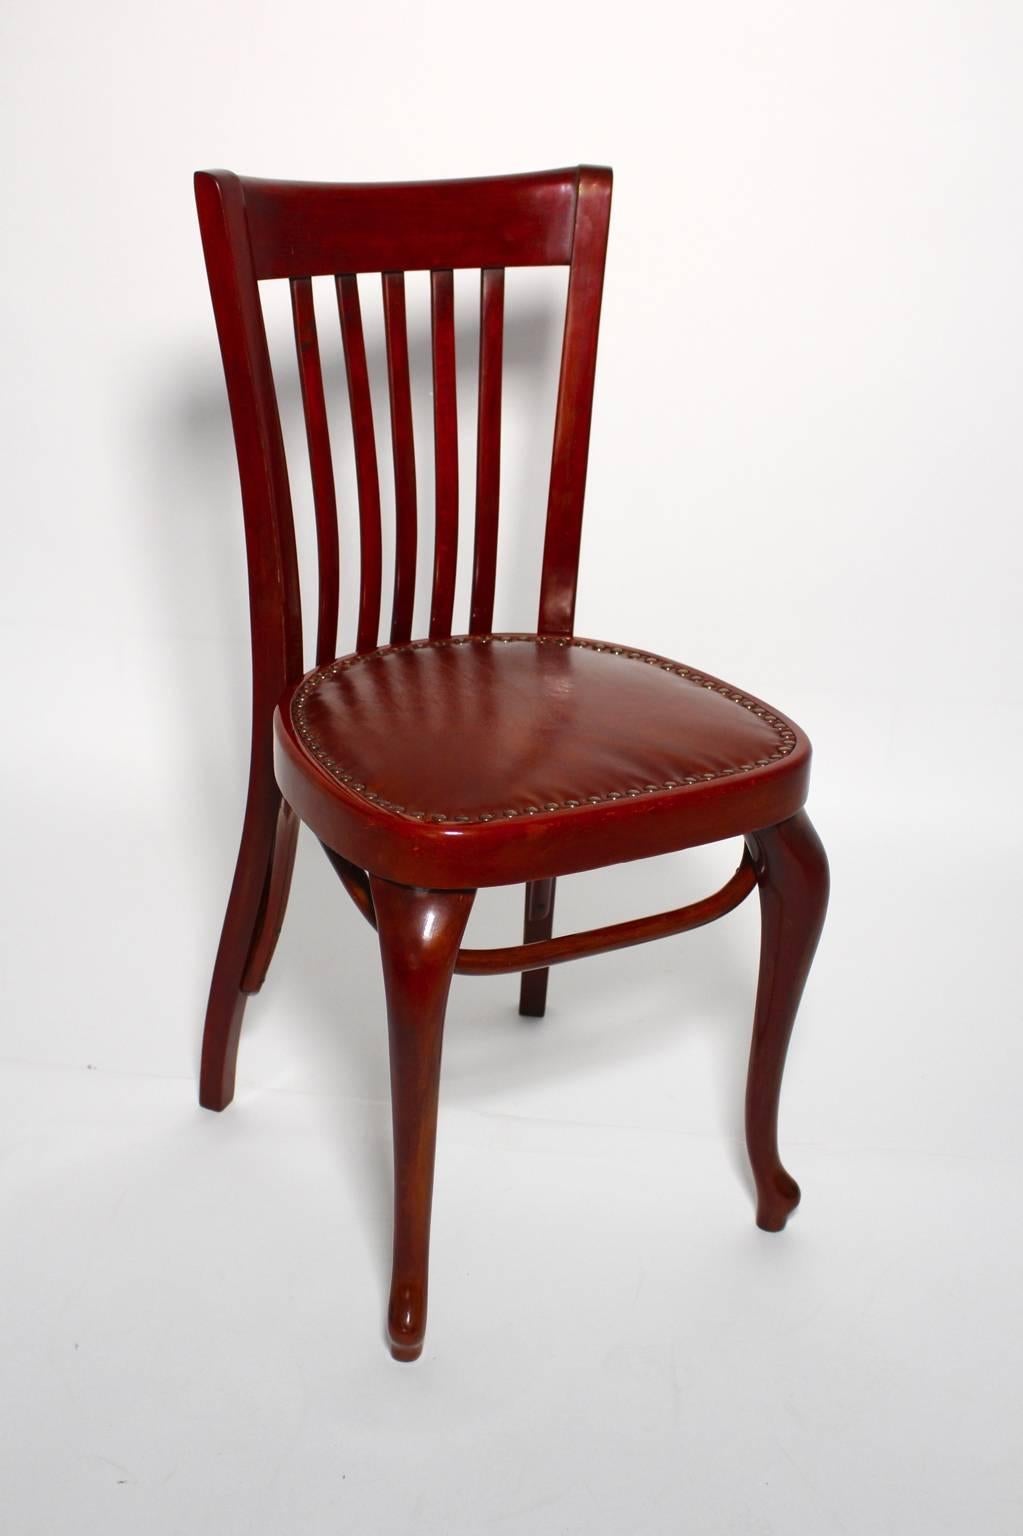 Jugendstil vintage Chair Model number 519 by Thonet. Adolf Loos designed the chair for Cafe Capua.
While the wooden parts are shellac polished by hand, the seat is re-upholstered with brown leather.
Made of stained beechwood and bentwood.
This model